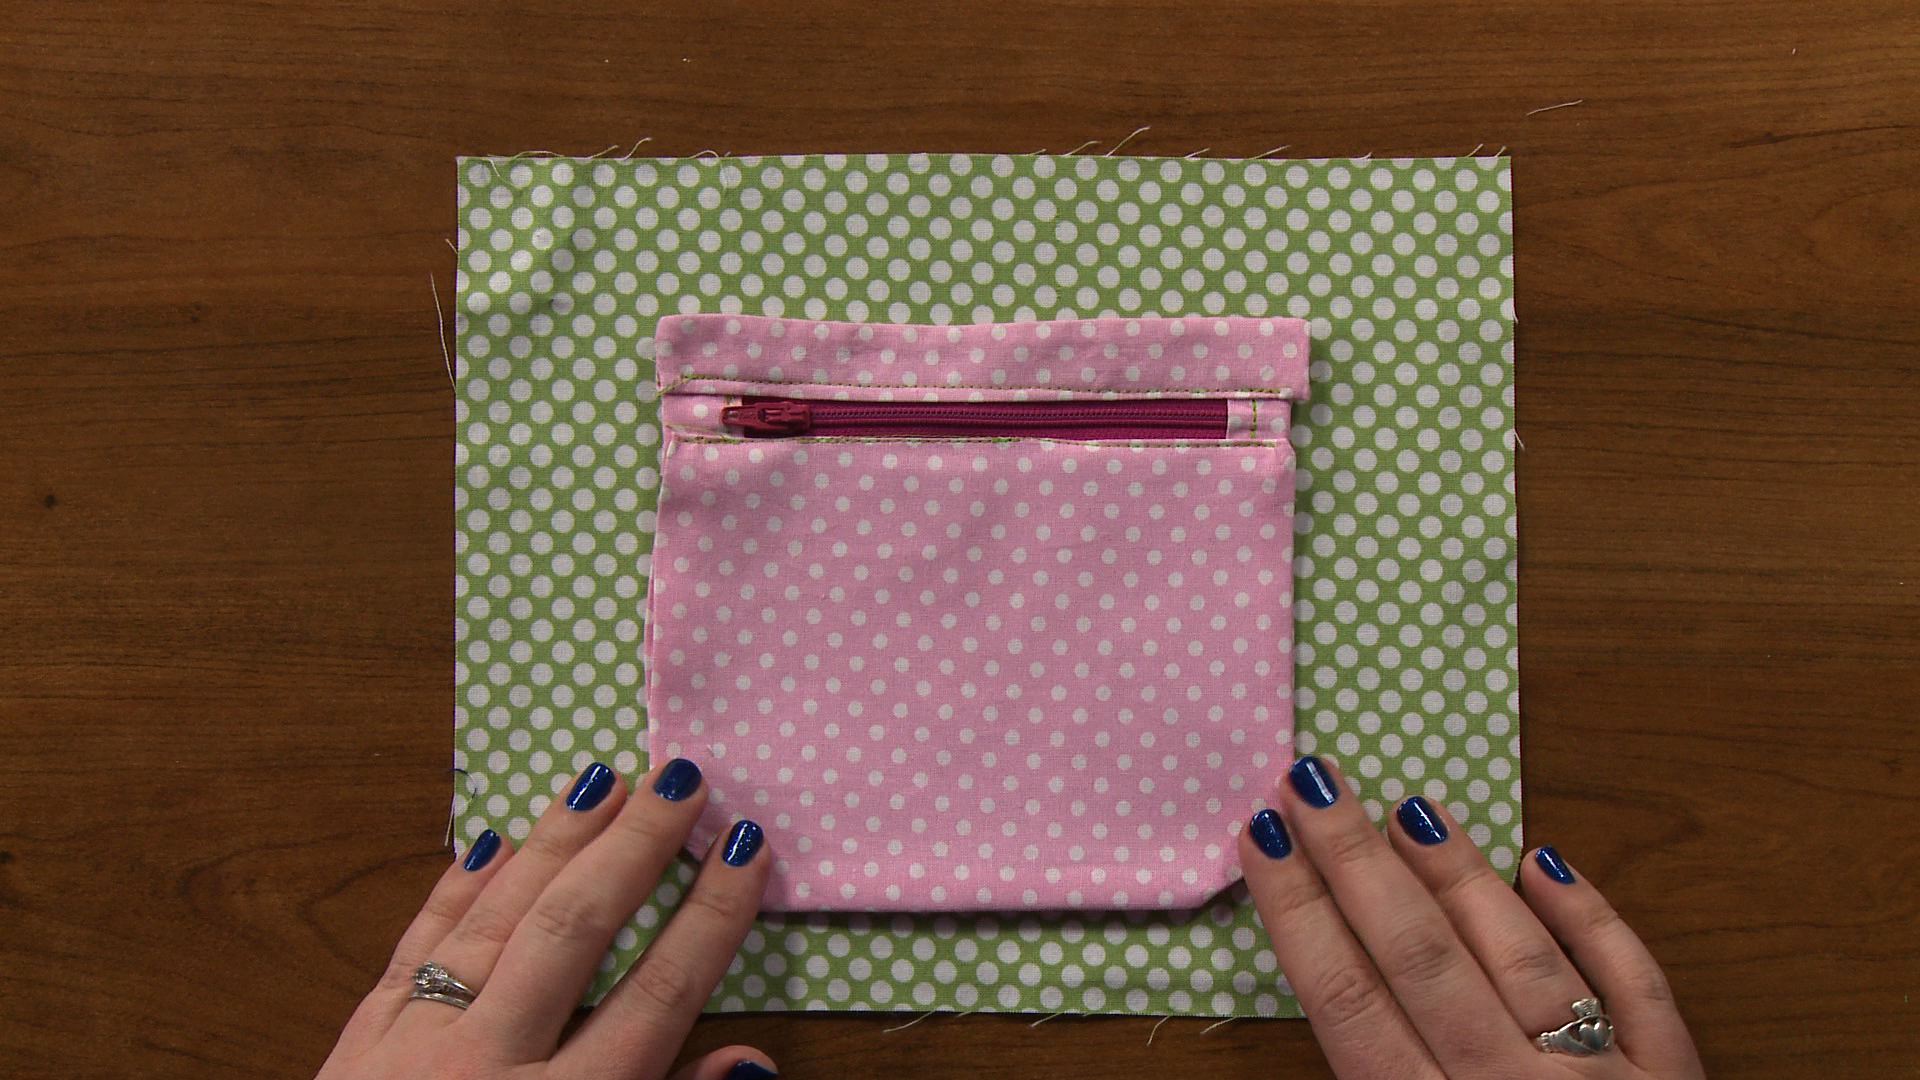 DIY Sewing Project: Sew a Purse Lining product featured image thumbnail.